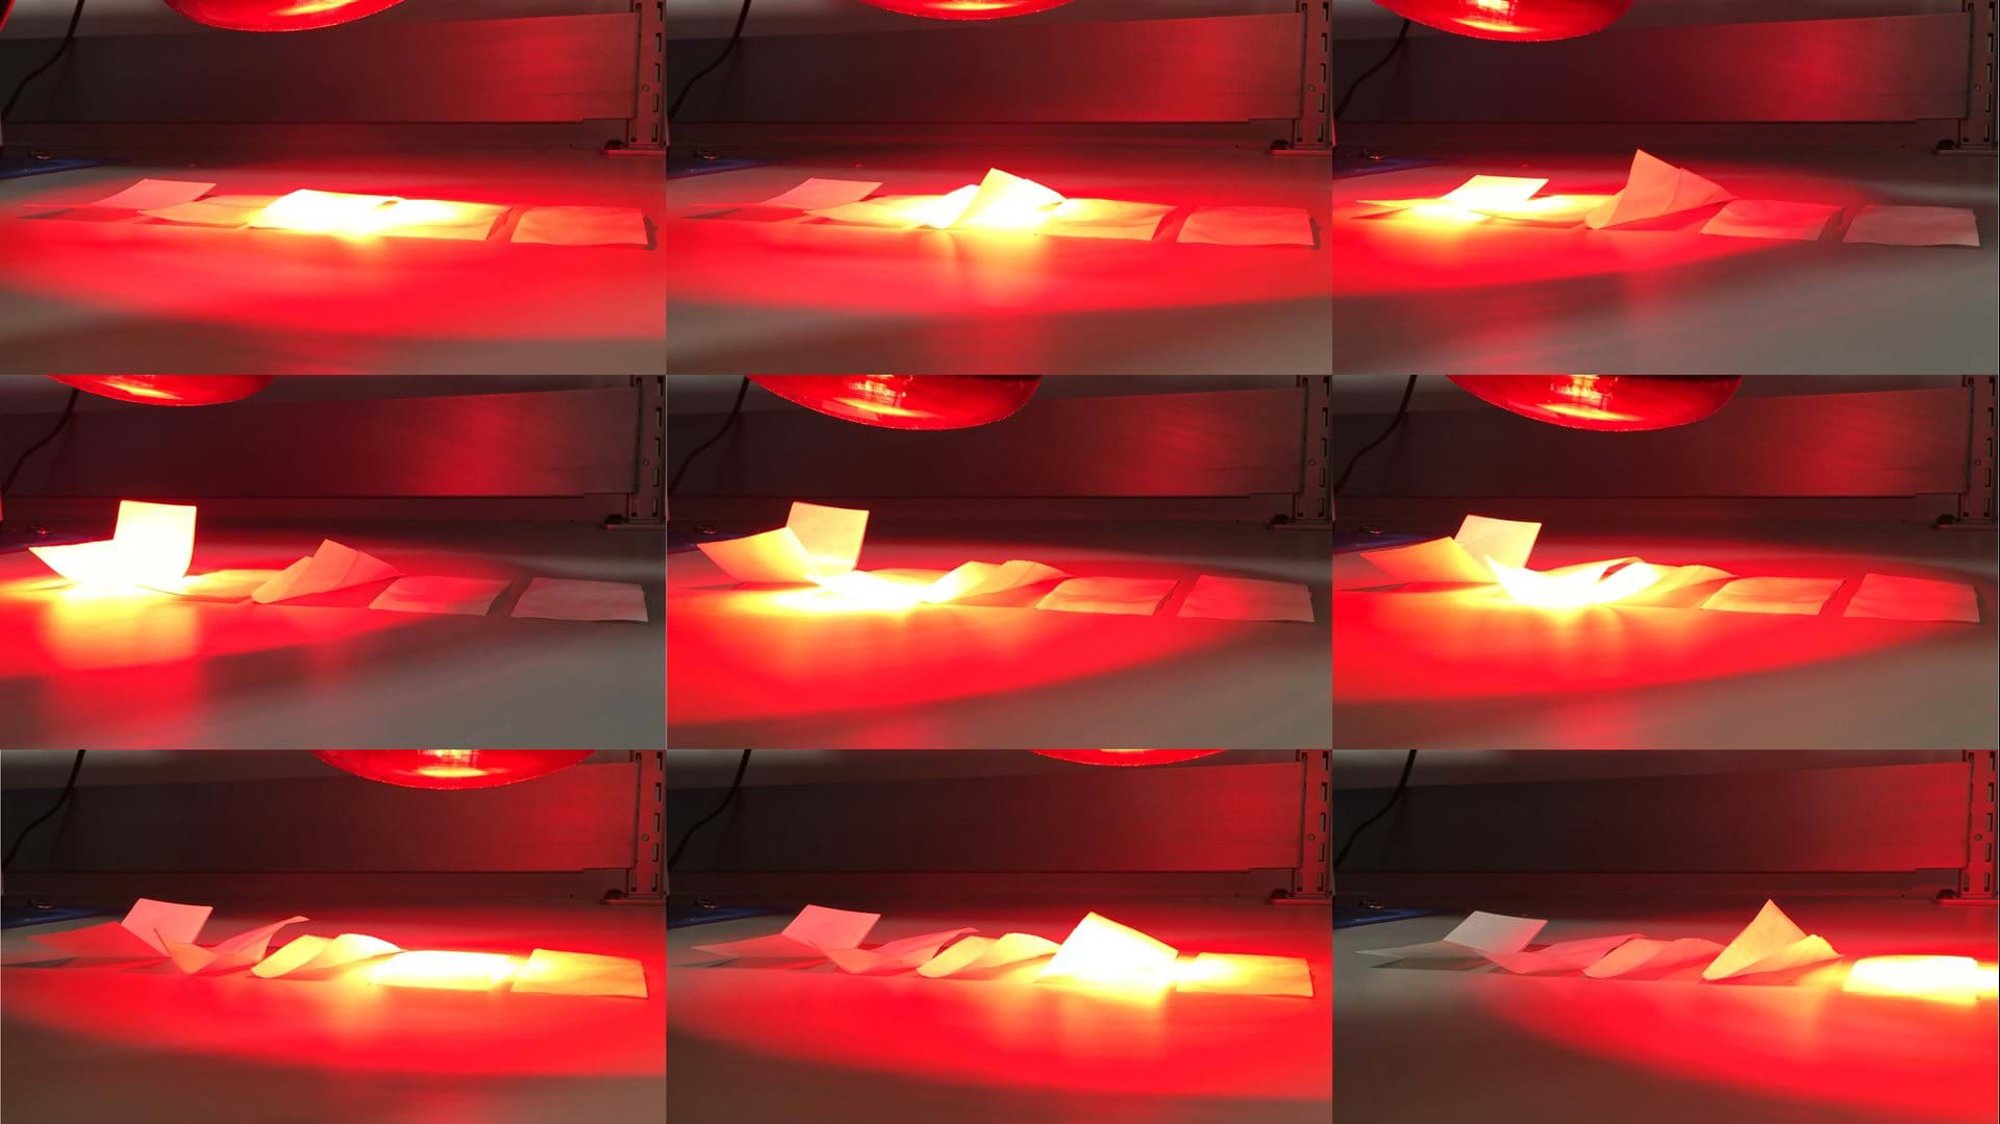 Stills taken from a video showing initial physical experiments with thermo-active laminates; the samples of different layering patterns display their deformations when exposed to direct heat. © Foster + Partners / Autodesk